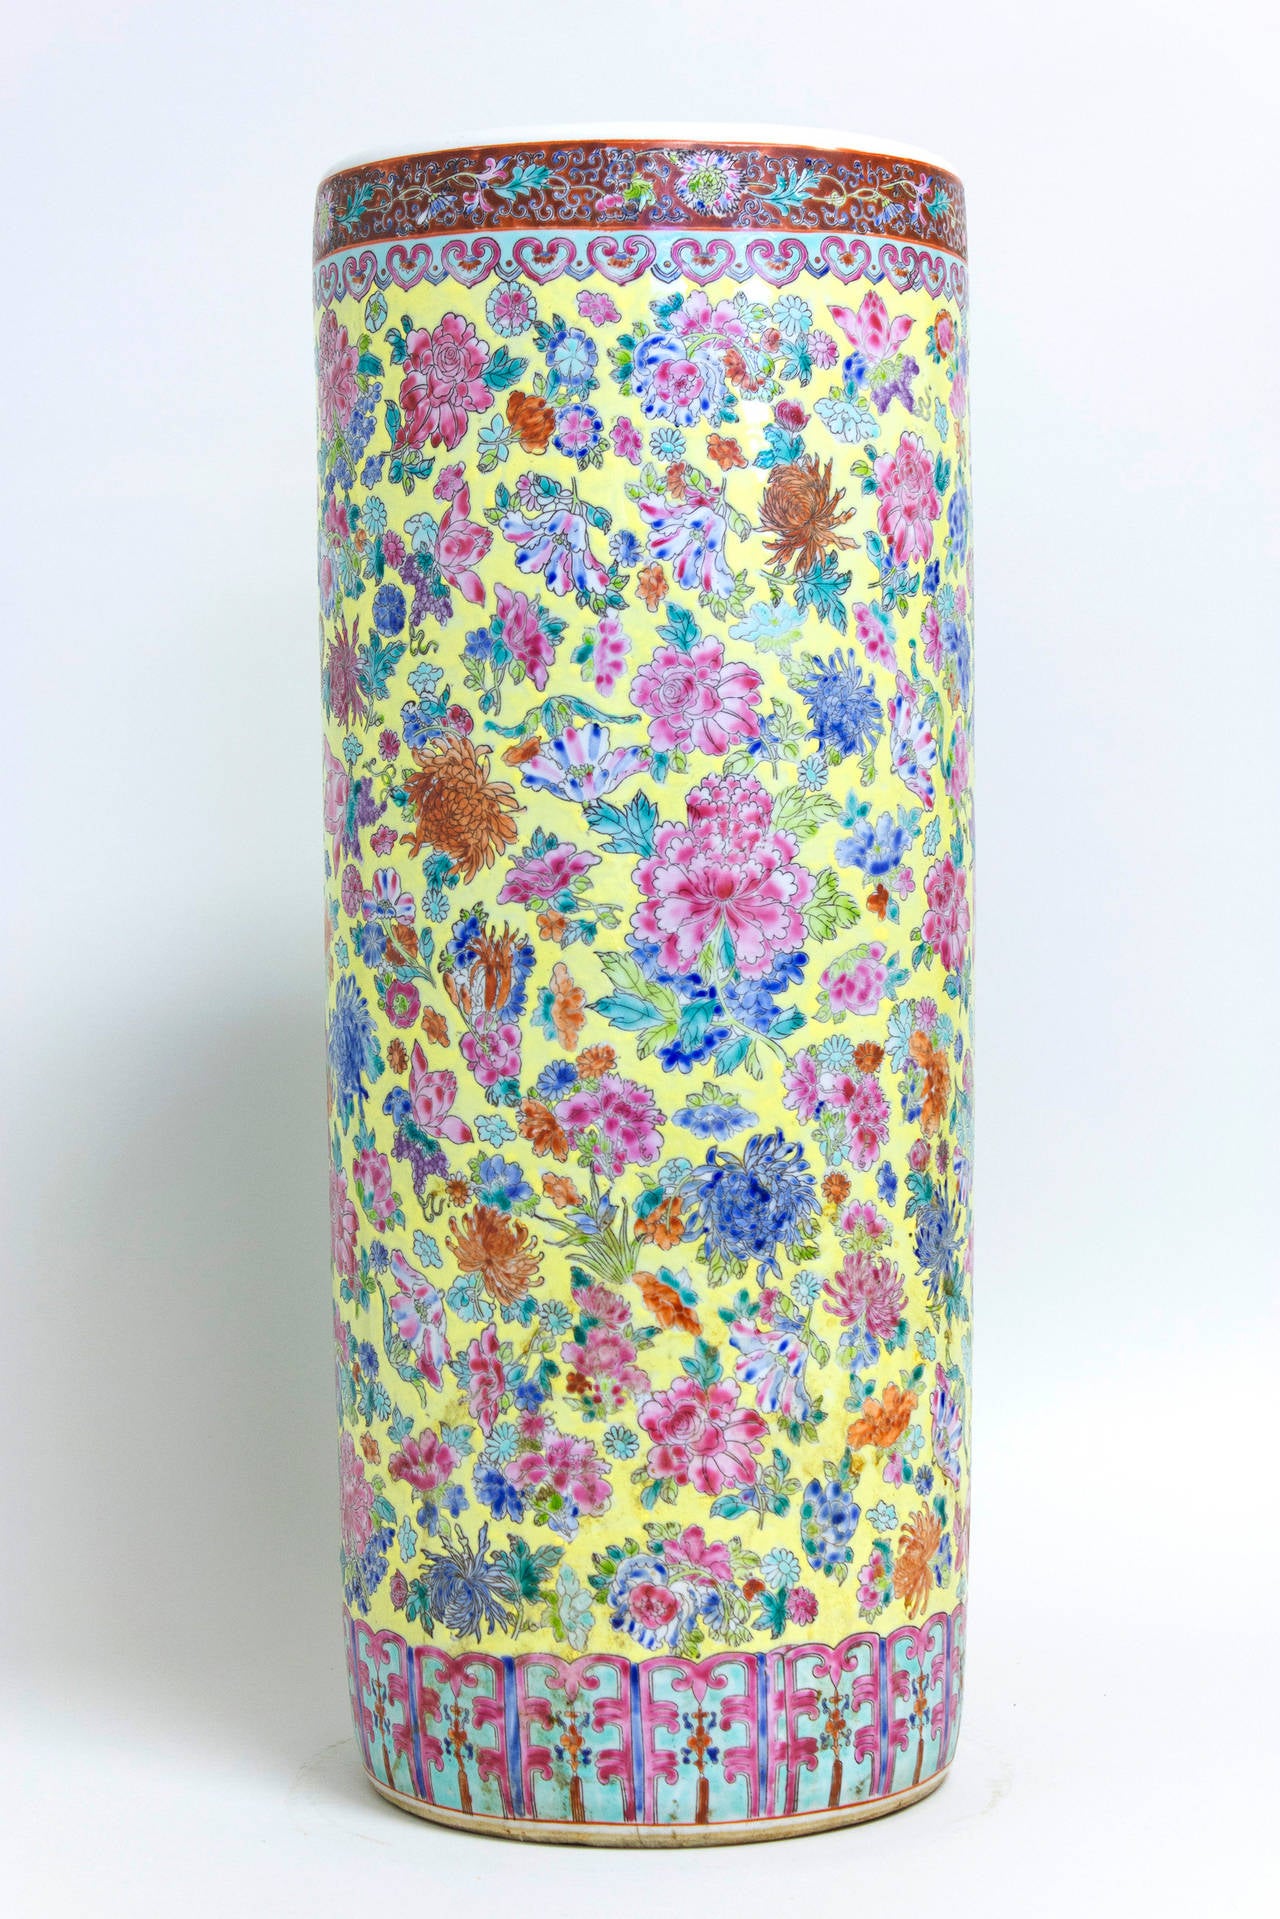 Oversized ceramic cylindrical vessel, probably Chinese, 1950s. Hand-thrown and painted, the craftsmanship is excellent. Exterior with yellow background and colorful floral decoration as well as decorative banding around the top and bottom rims.